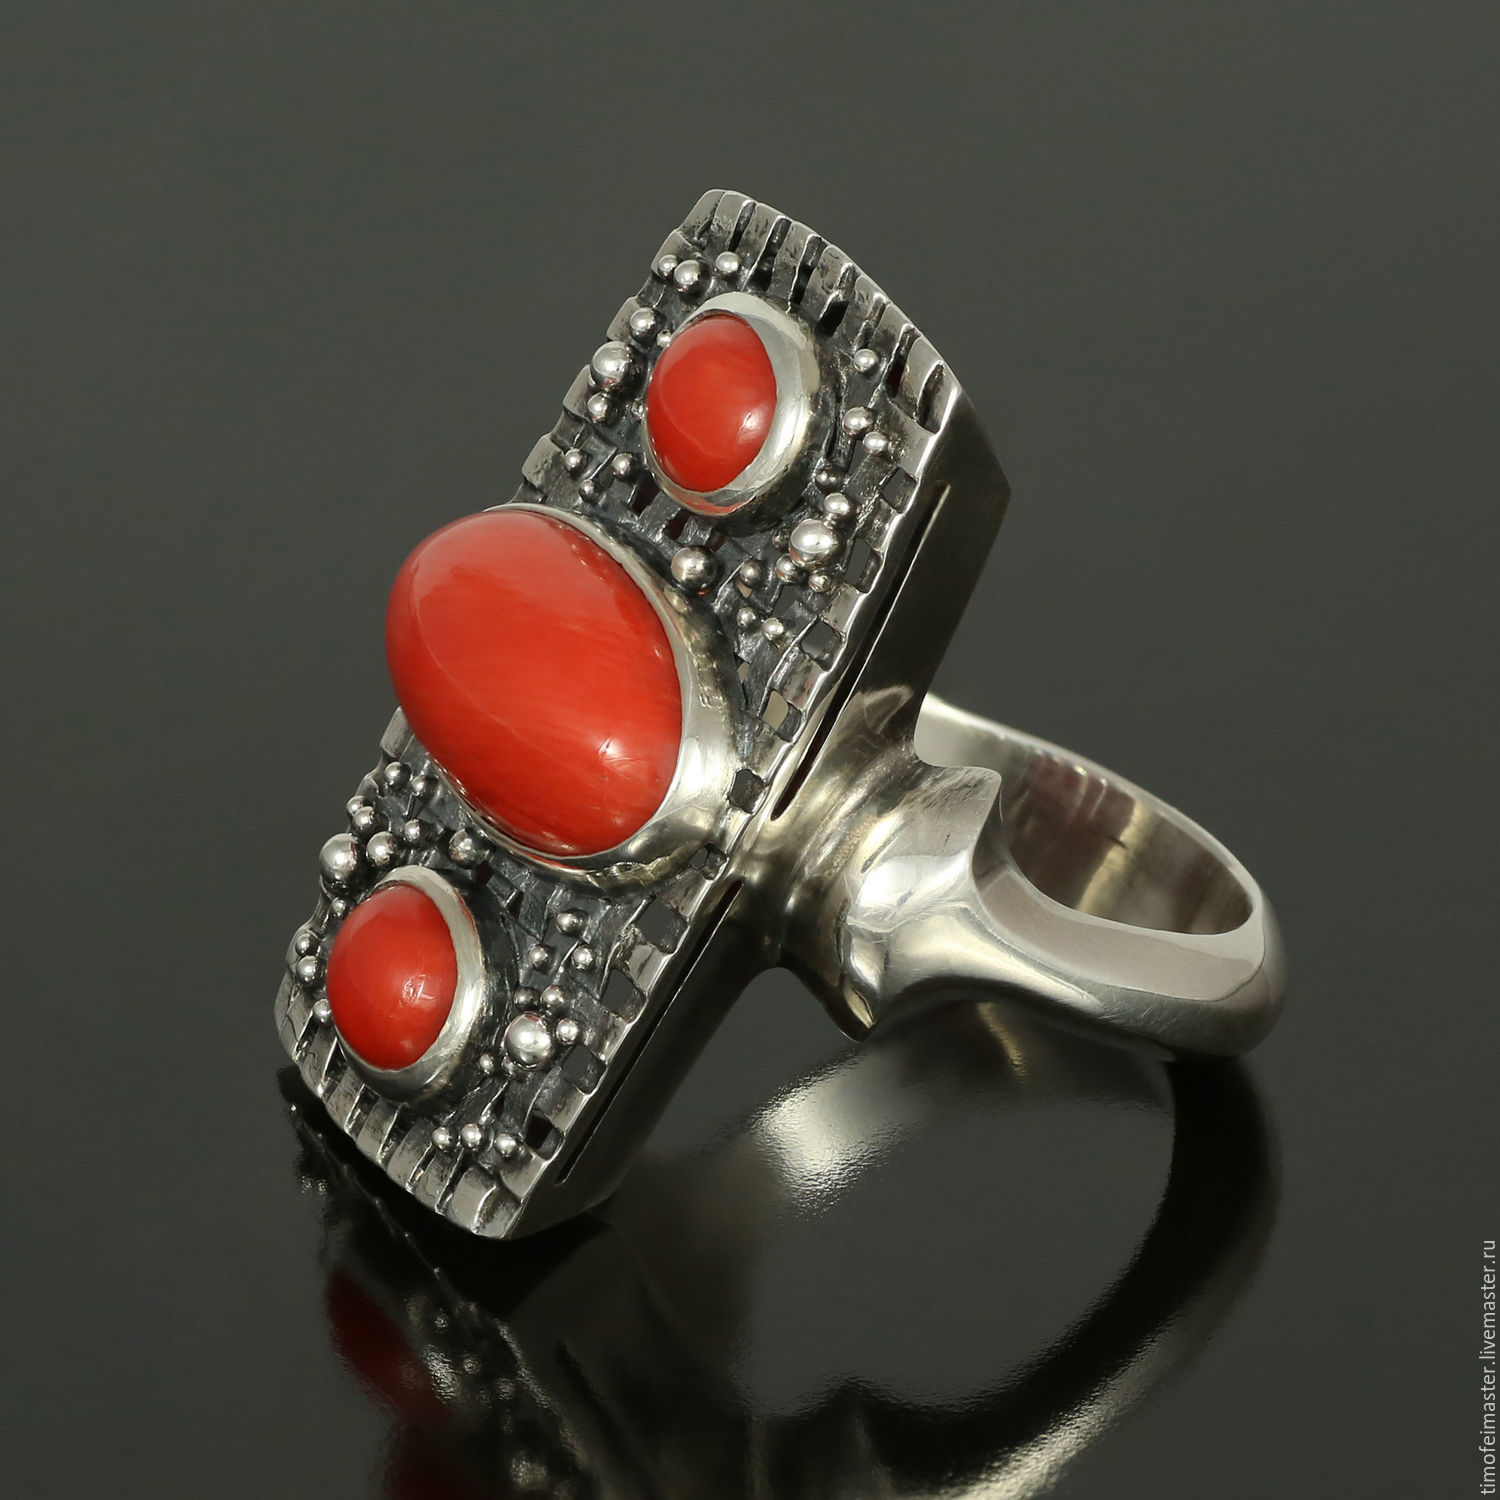 Ebony and coral ring